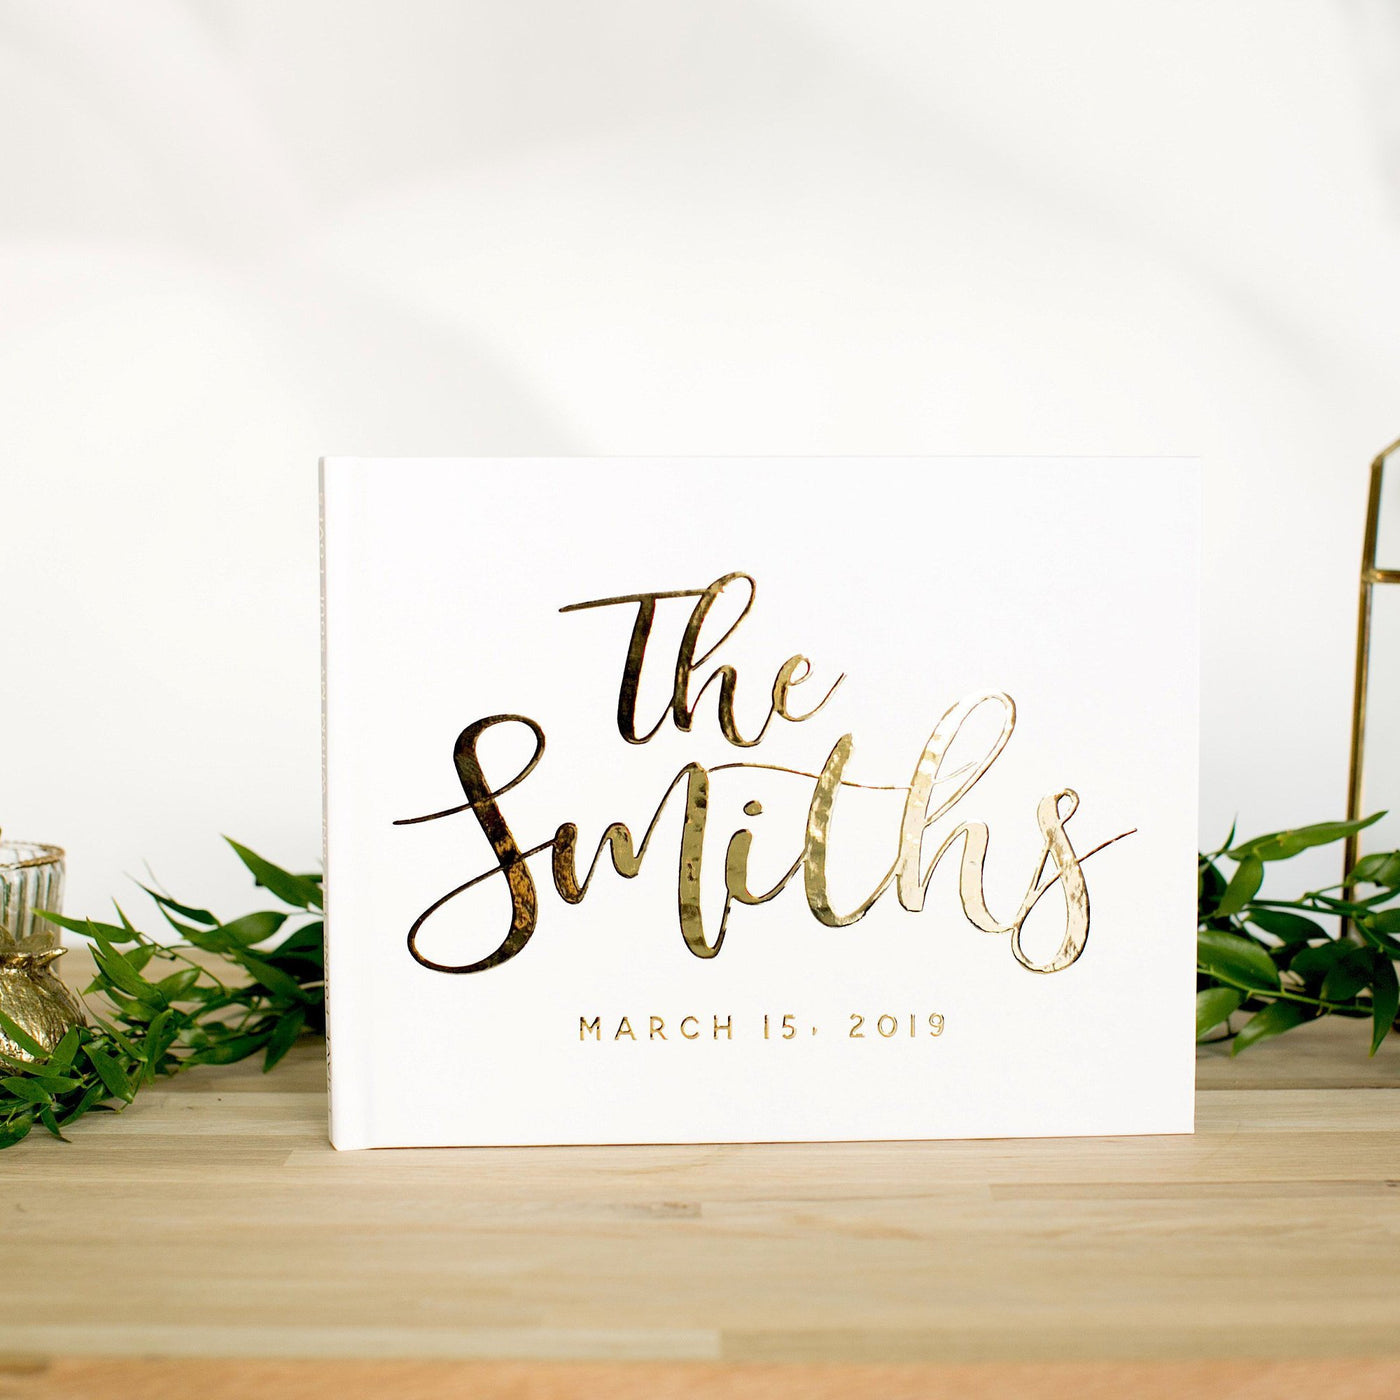 Personalized Event Guest Book